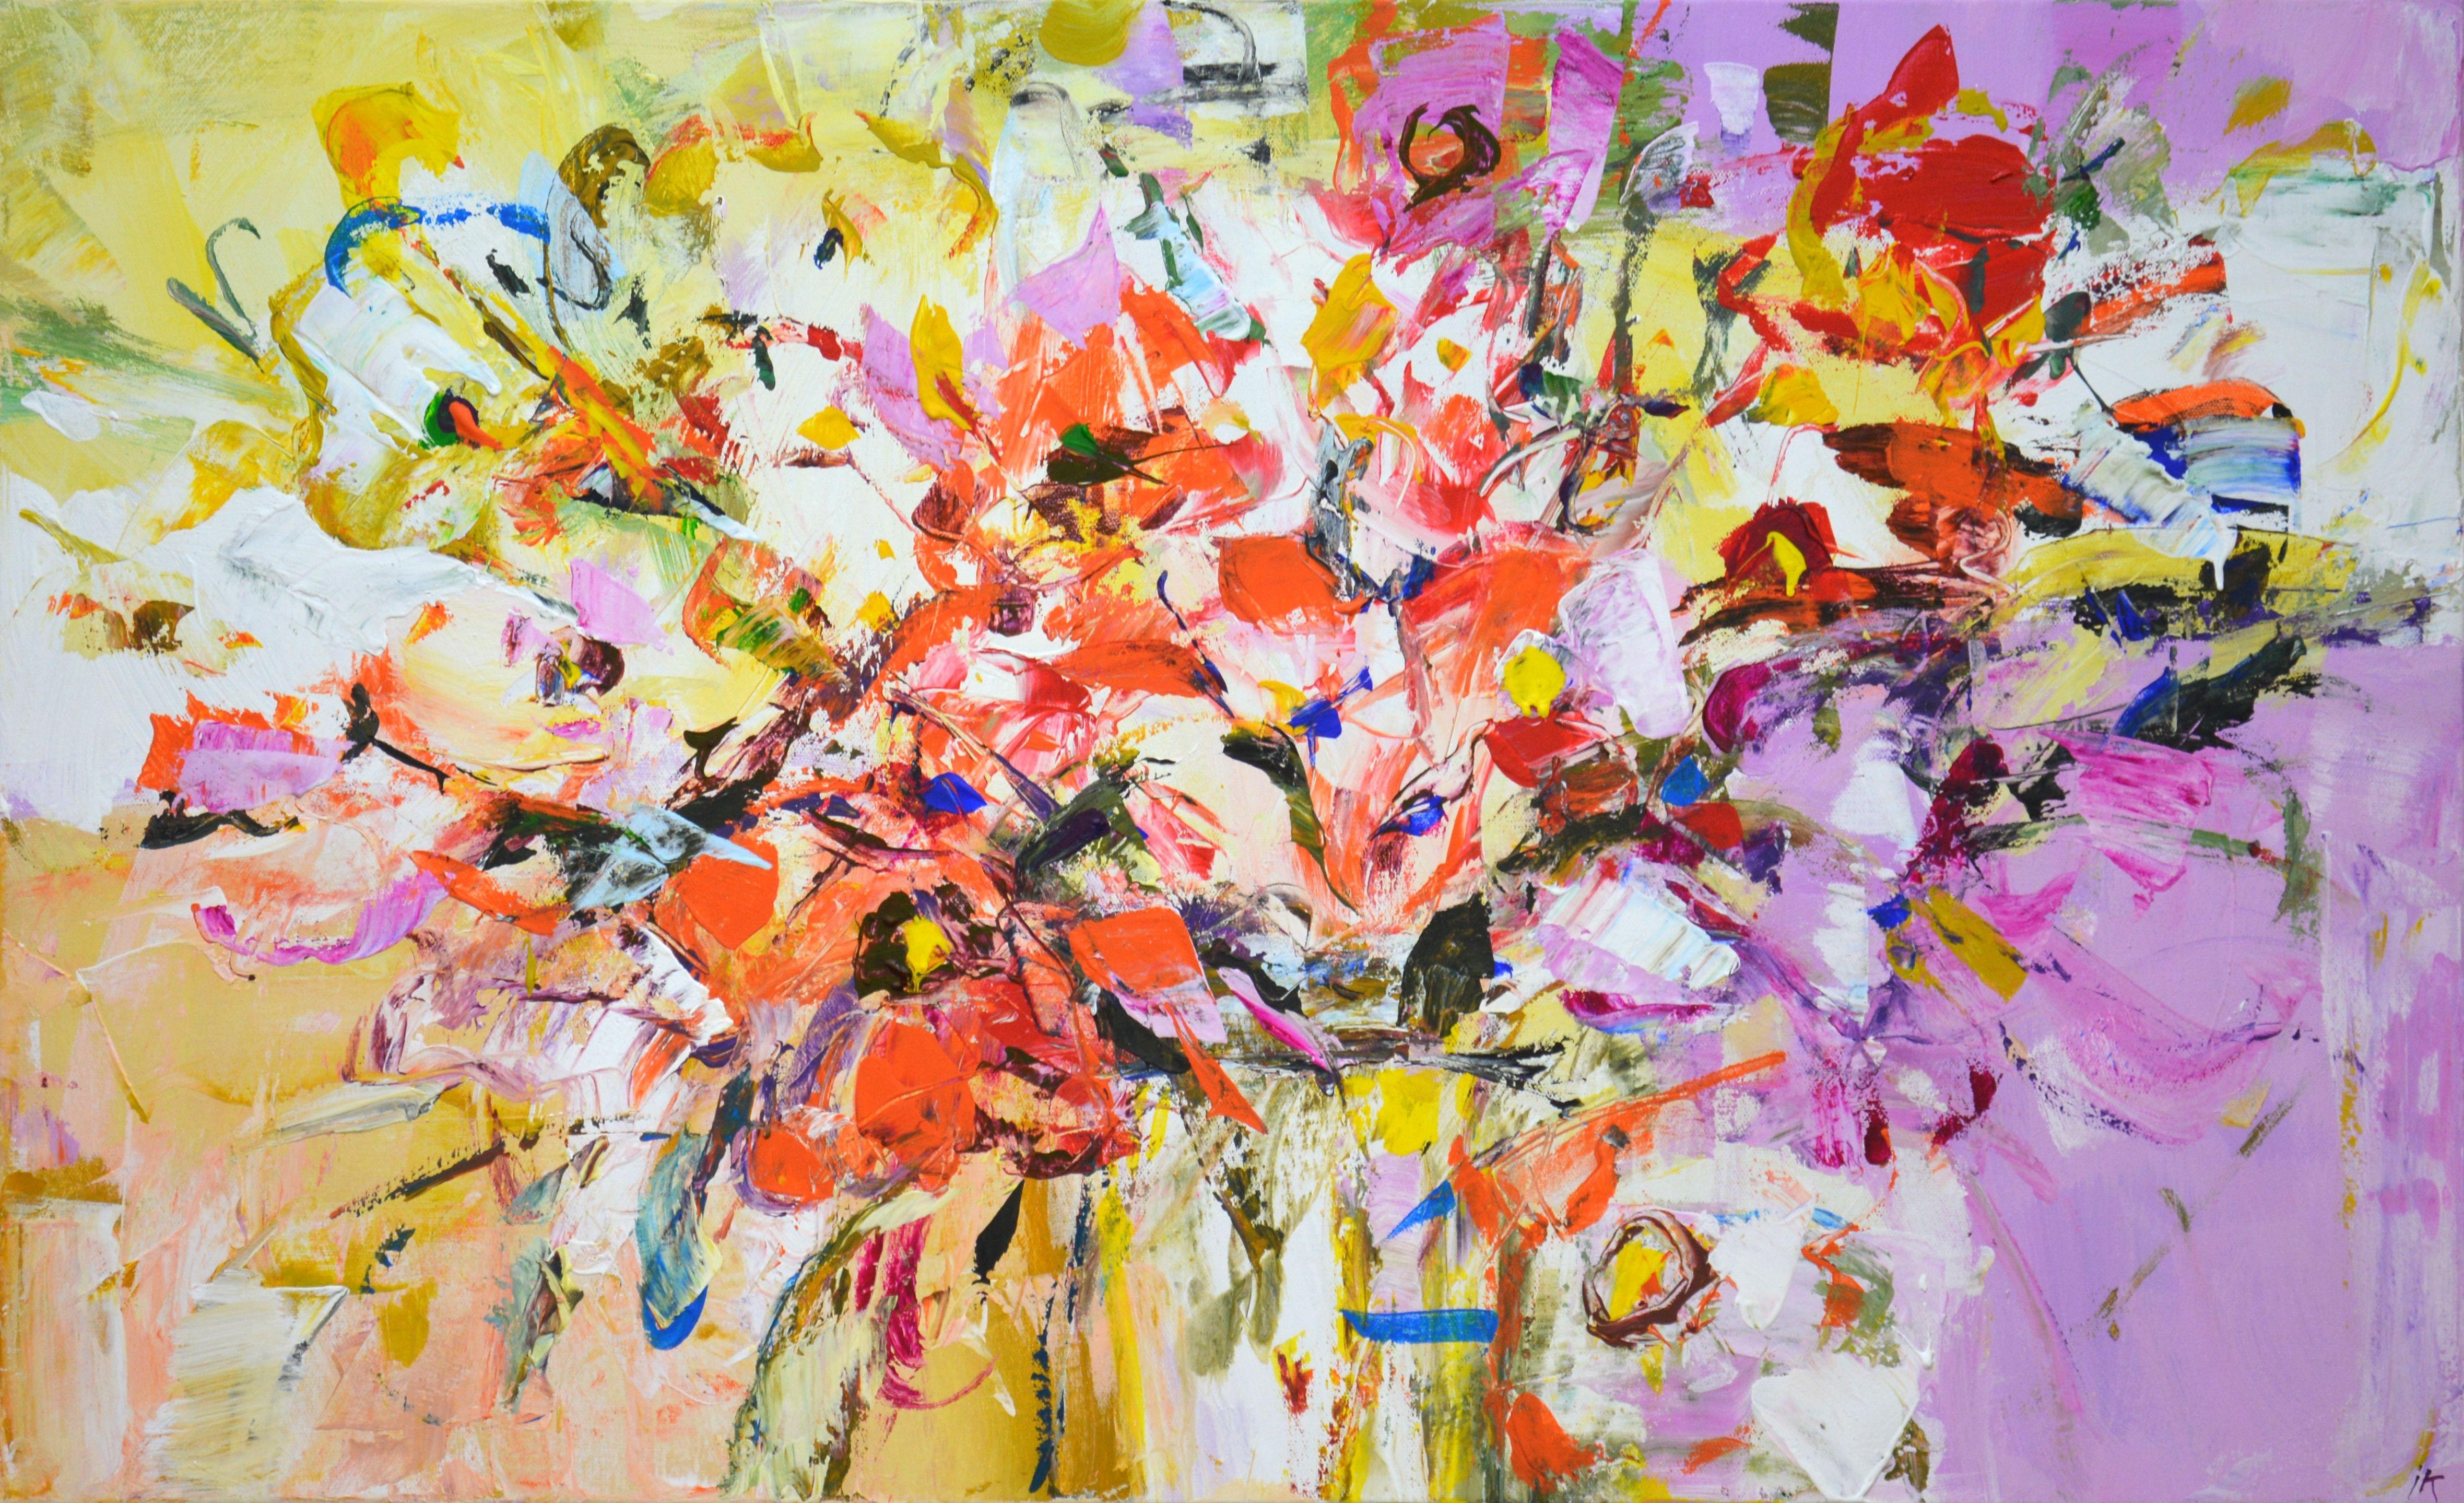 Summer memories. Abstract, expressive bouquet of poppies. Modern On the palette, light tones of yellow, pink, white, red of a certain shape are vigorously mixed, scattered on the canvas with a spatula and a brush. Painting is a way to show the